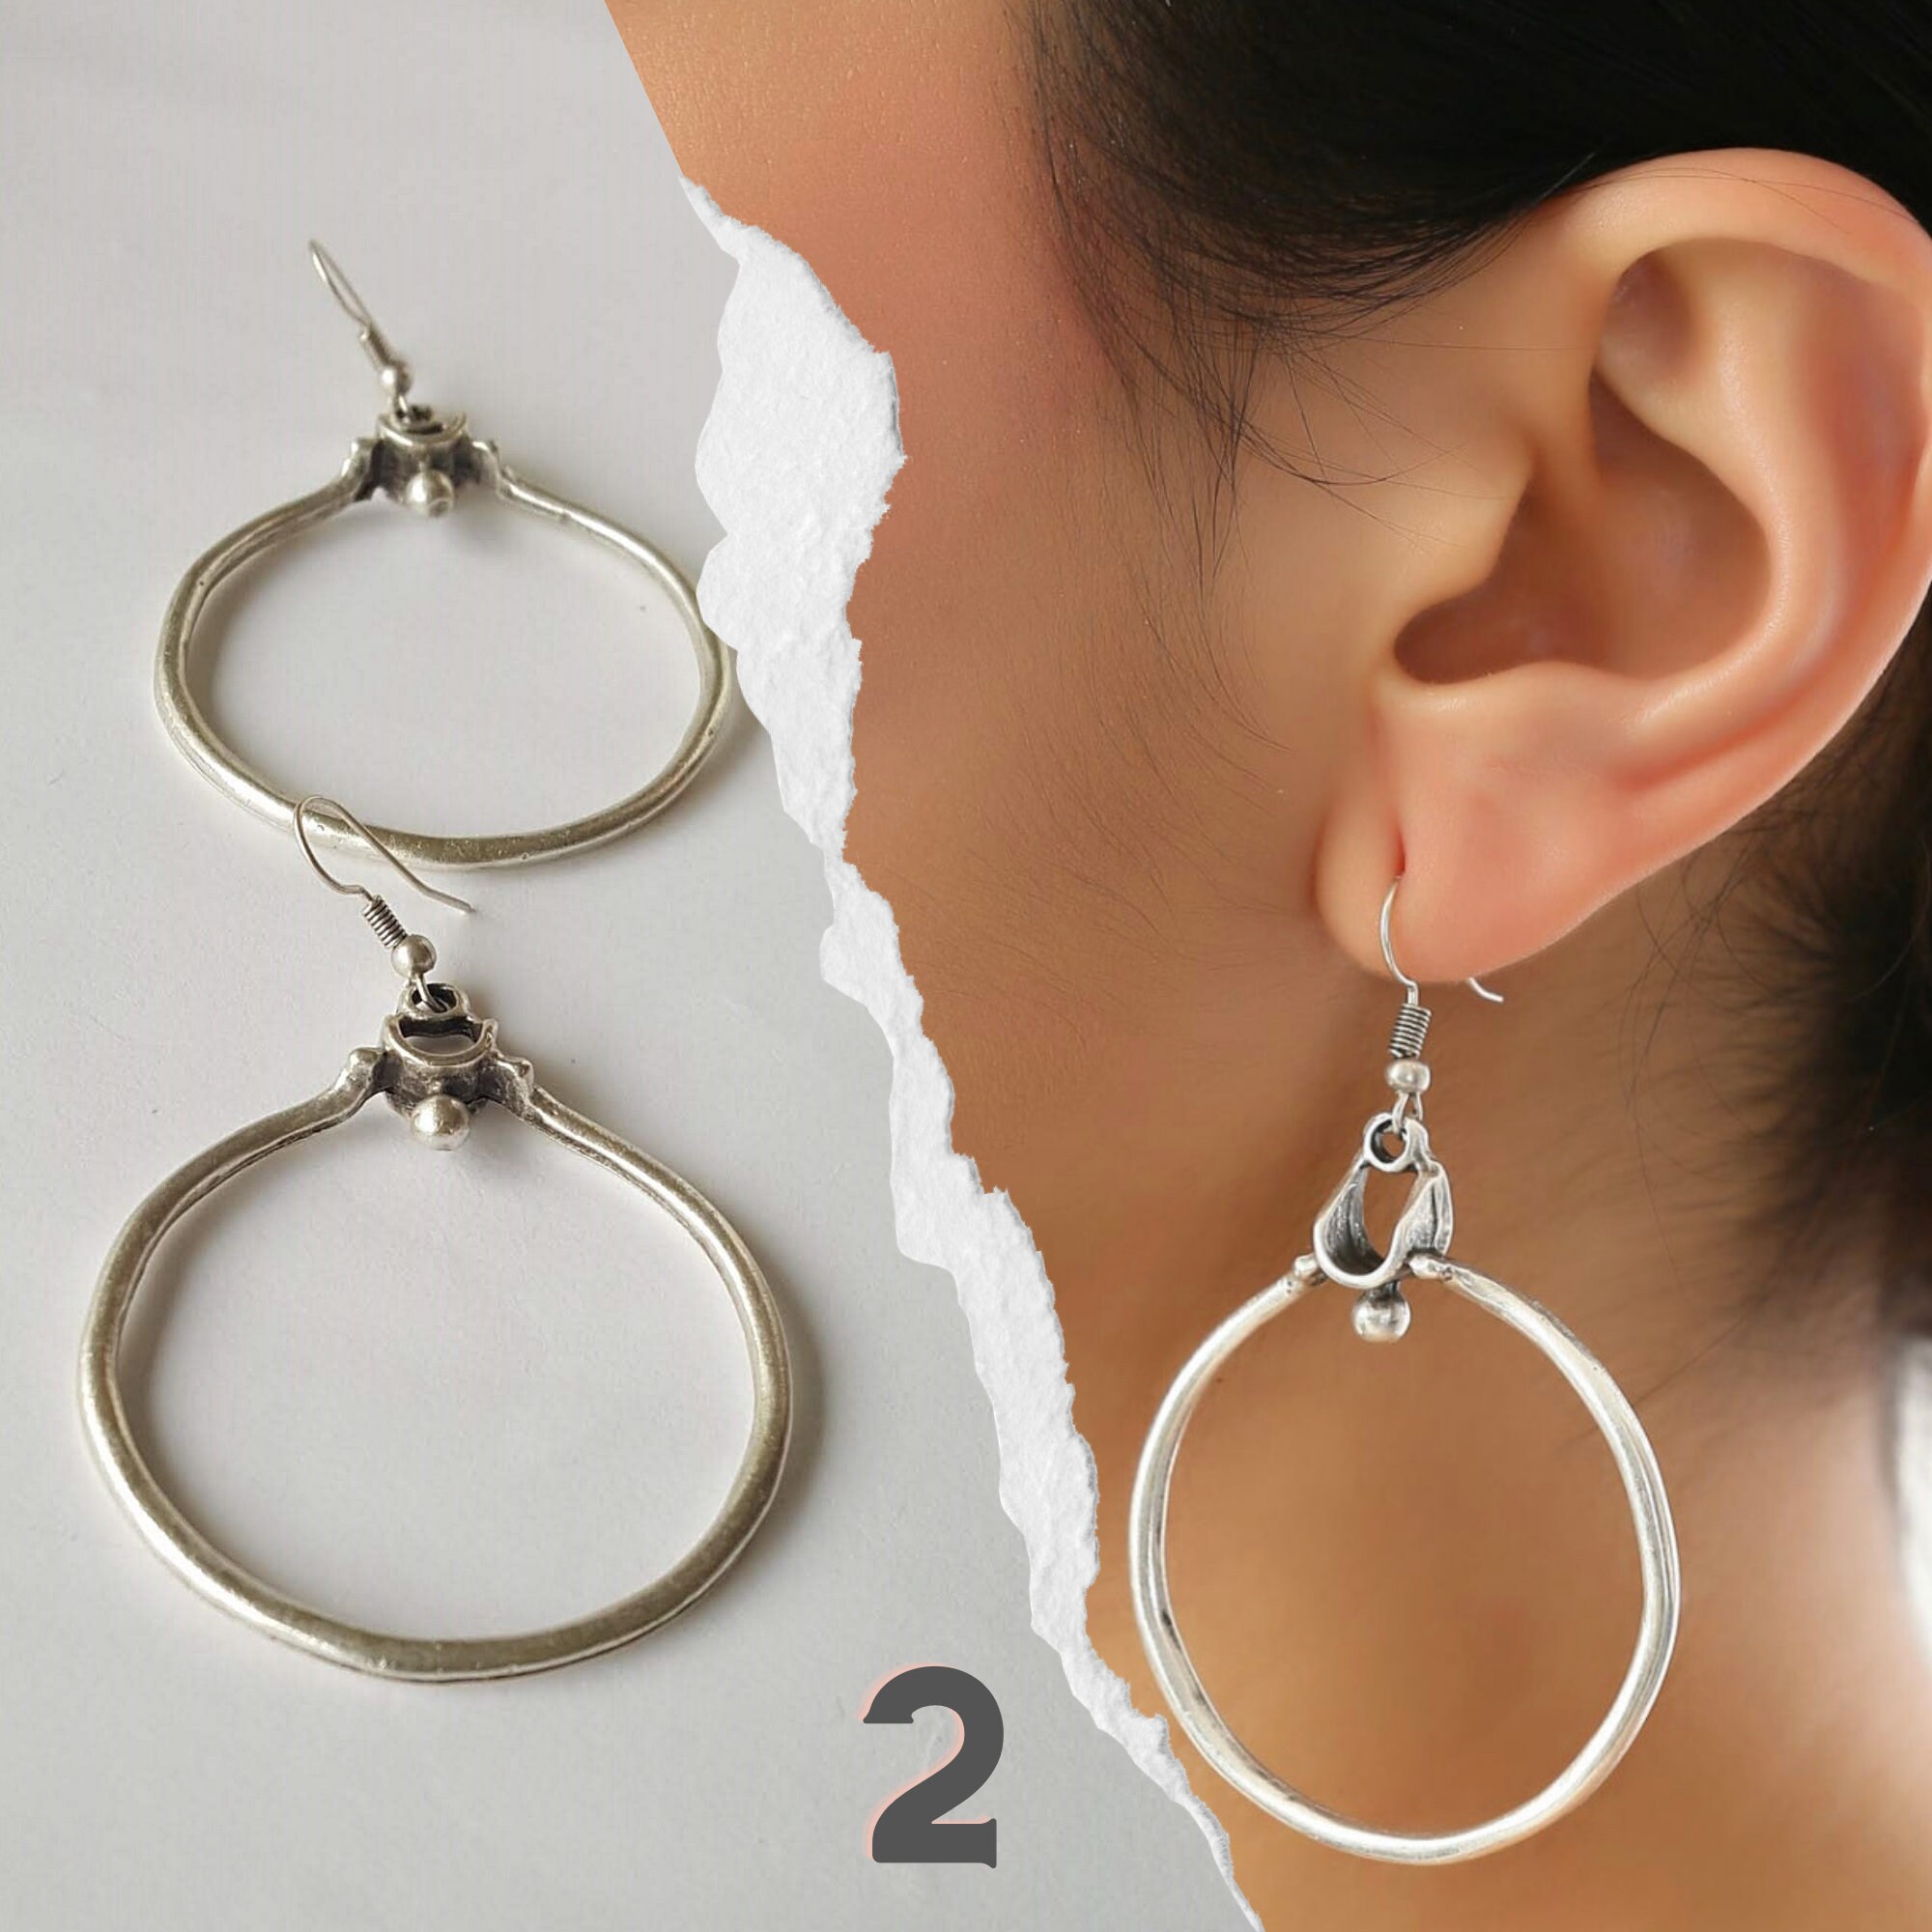  White Big Boobs Bottom Hot Sexy Earrings Dangle Hoop Jewelry  Drop Circle: Clothing, Shoes & Jewelry